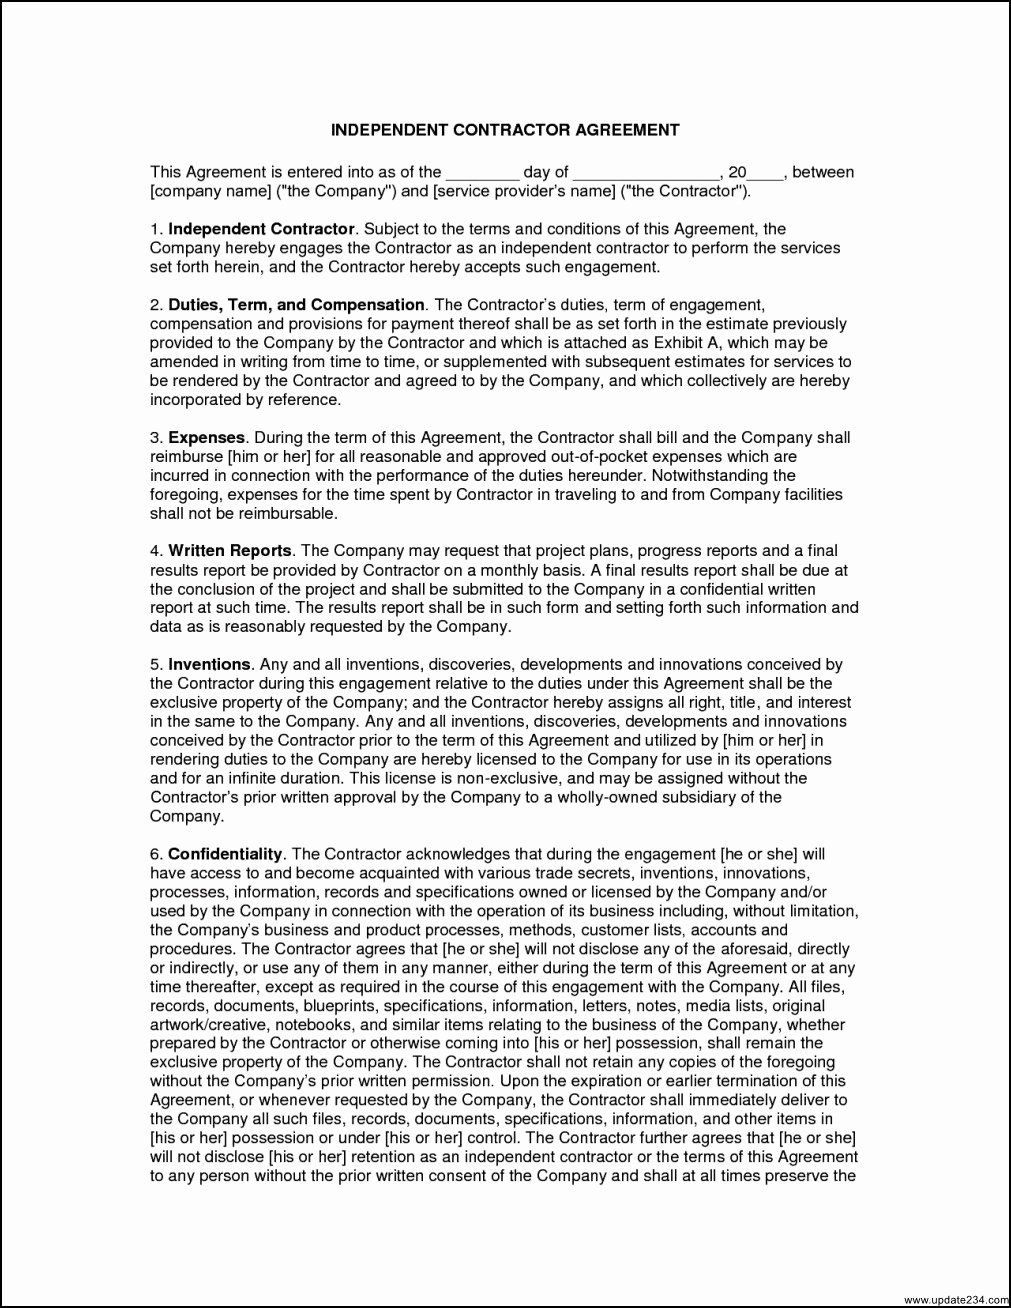 Simple Independent Contractor Agreement Template Inspirational Simple Independent Contractor Agreement Template